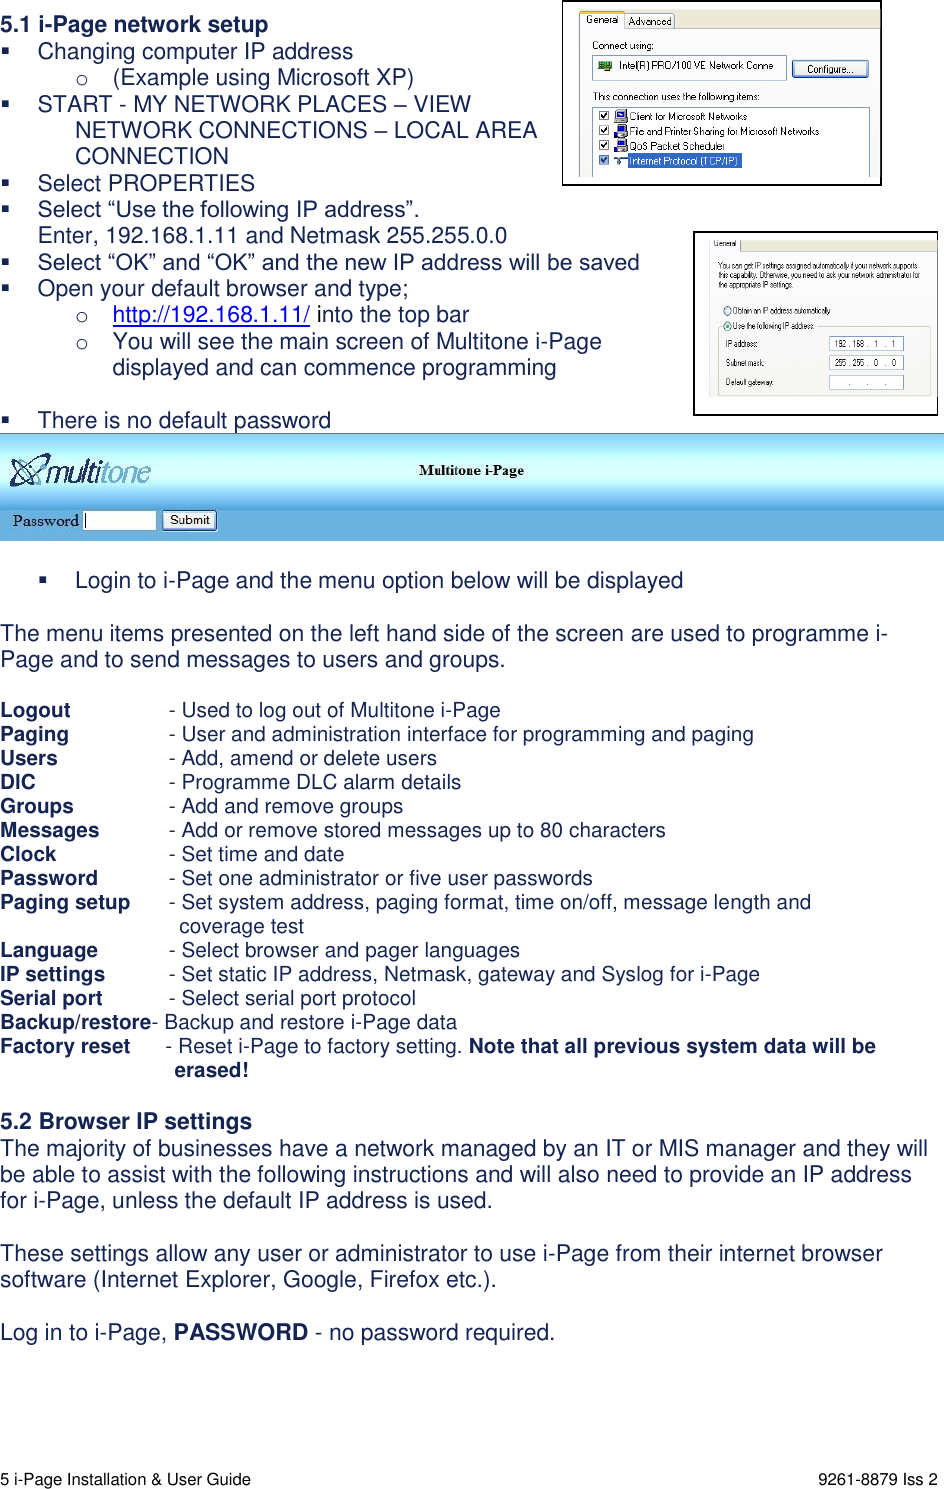  5 i-Page Installation &amp; User Guide                                                                      9261-8879 Iss 2   5.1 i-Page network setup   Changing computer IP address  o  (Example using Microsoft XP)   START - MY NETWORK PLACES – VIEW  NETWORK CONNECTIONS – LOCAL AREA CONNECTION   Select PROPERTIES  Select “Use the following IP address”. Enter, 192.168.1.11 and Netmask 255.255.0.0  Select “OK” and “OK” and the new IP address will be saved   Open your default browser and type; o http://192.168.1.11/ into the top bar o  You will see the main screen of Multitone i-Page  displayed and can commence programming     There is no default password     Login to i-Page and the menu option below will be displayed  The menu items presented on the left hand side of the screen are used to programme i-Page and to send messages to users and groups.  Logout   - Used to log out of Multitone i-Page Paging   - User and administration interface for programming and paging Users   - Add, amend or delete users DlC   - Programme DLC alarm details Groups   - Add and remove groups Messages   - Add or remove stored messages up to 80 characters Clock   - Set time and date Password   - Set one administrator or five user passwords Paging setup   - Set system address, paging format, time on/off, message length and                                 coverage test Language   - Select browser and pager languages IP settings   - Set static IP address, Netmask, gateway and Syslog for i-Page Serial port   - Select serial port protocol Backup/restore- Backup and restore i-Page data Factory reset      - Reset i-Page to factory setting. Note that all previous system data will be         erased!  5.2 Browser IP settings The majority of businesses have a network managed by an IT or MIS manager and they will be able to assist with the following instructions and will also need to provide an IP address for i-Page, unless the default IP address is used.  These settings allow any user or administrator to use i-Page from their internet browser software (Internet Explorer, Google, Firefox etc.).  Log in to i-Page, PASSWORD - no password required.     